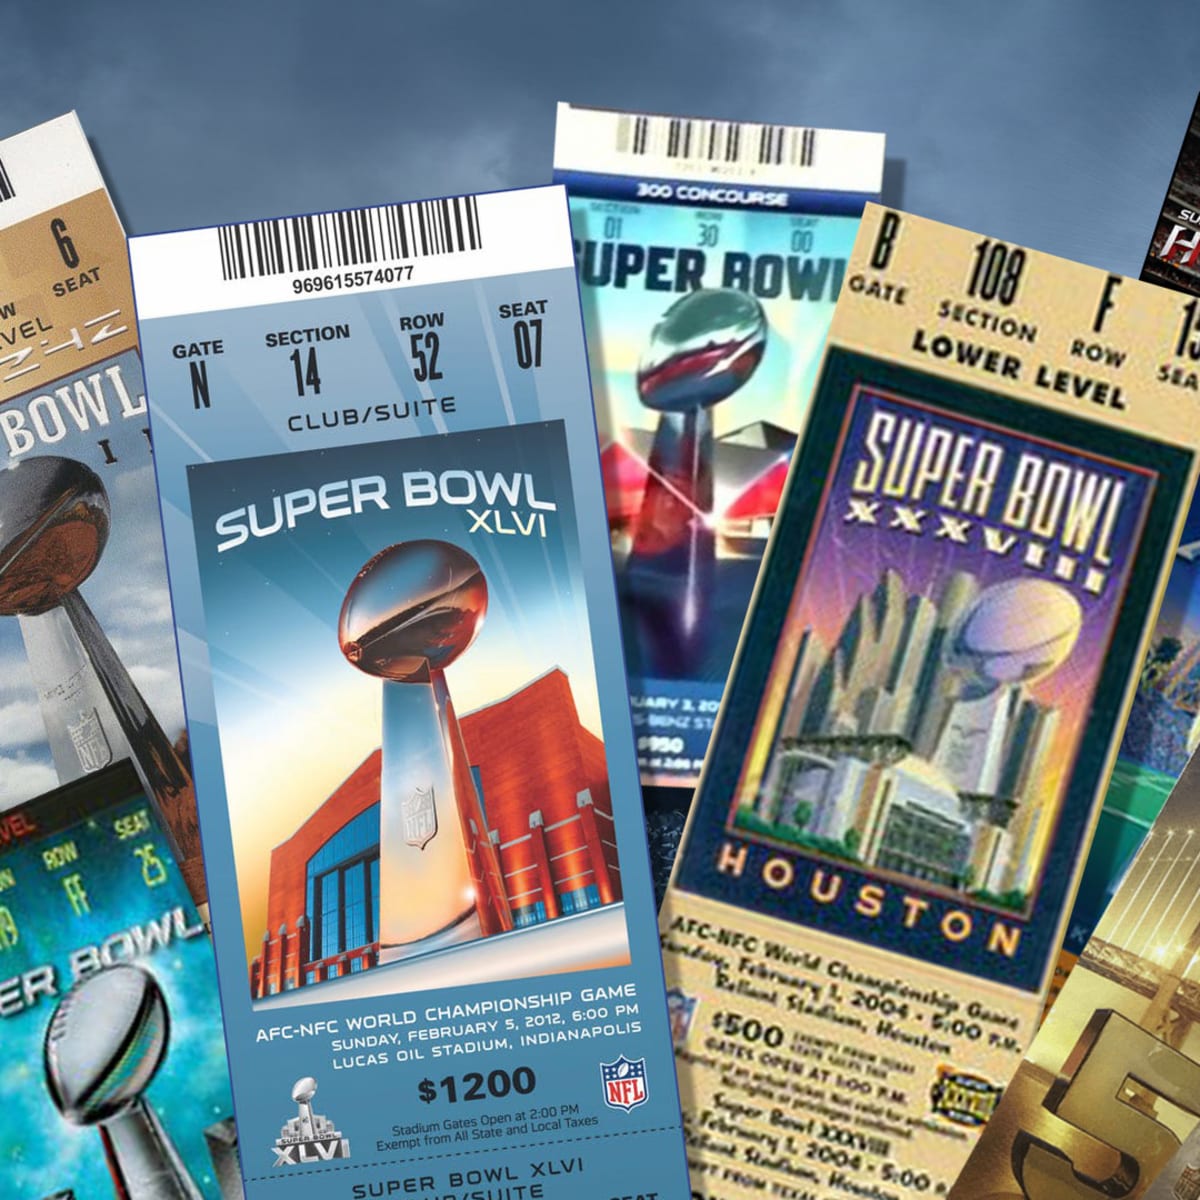 how much is the highest super bowl ticket